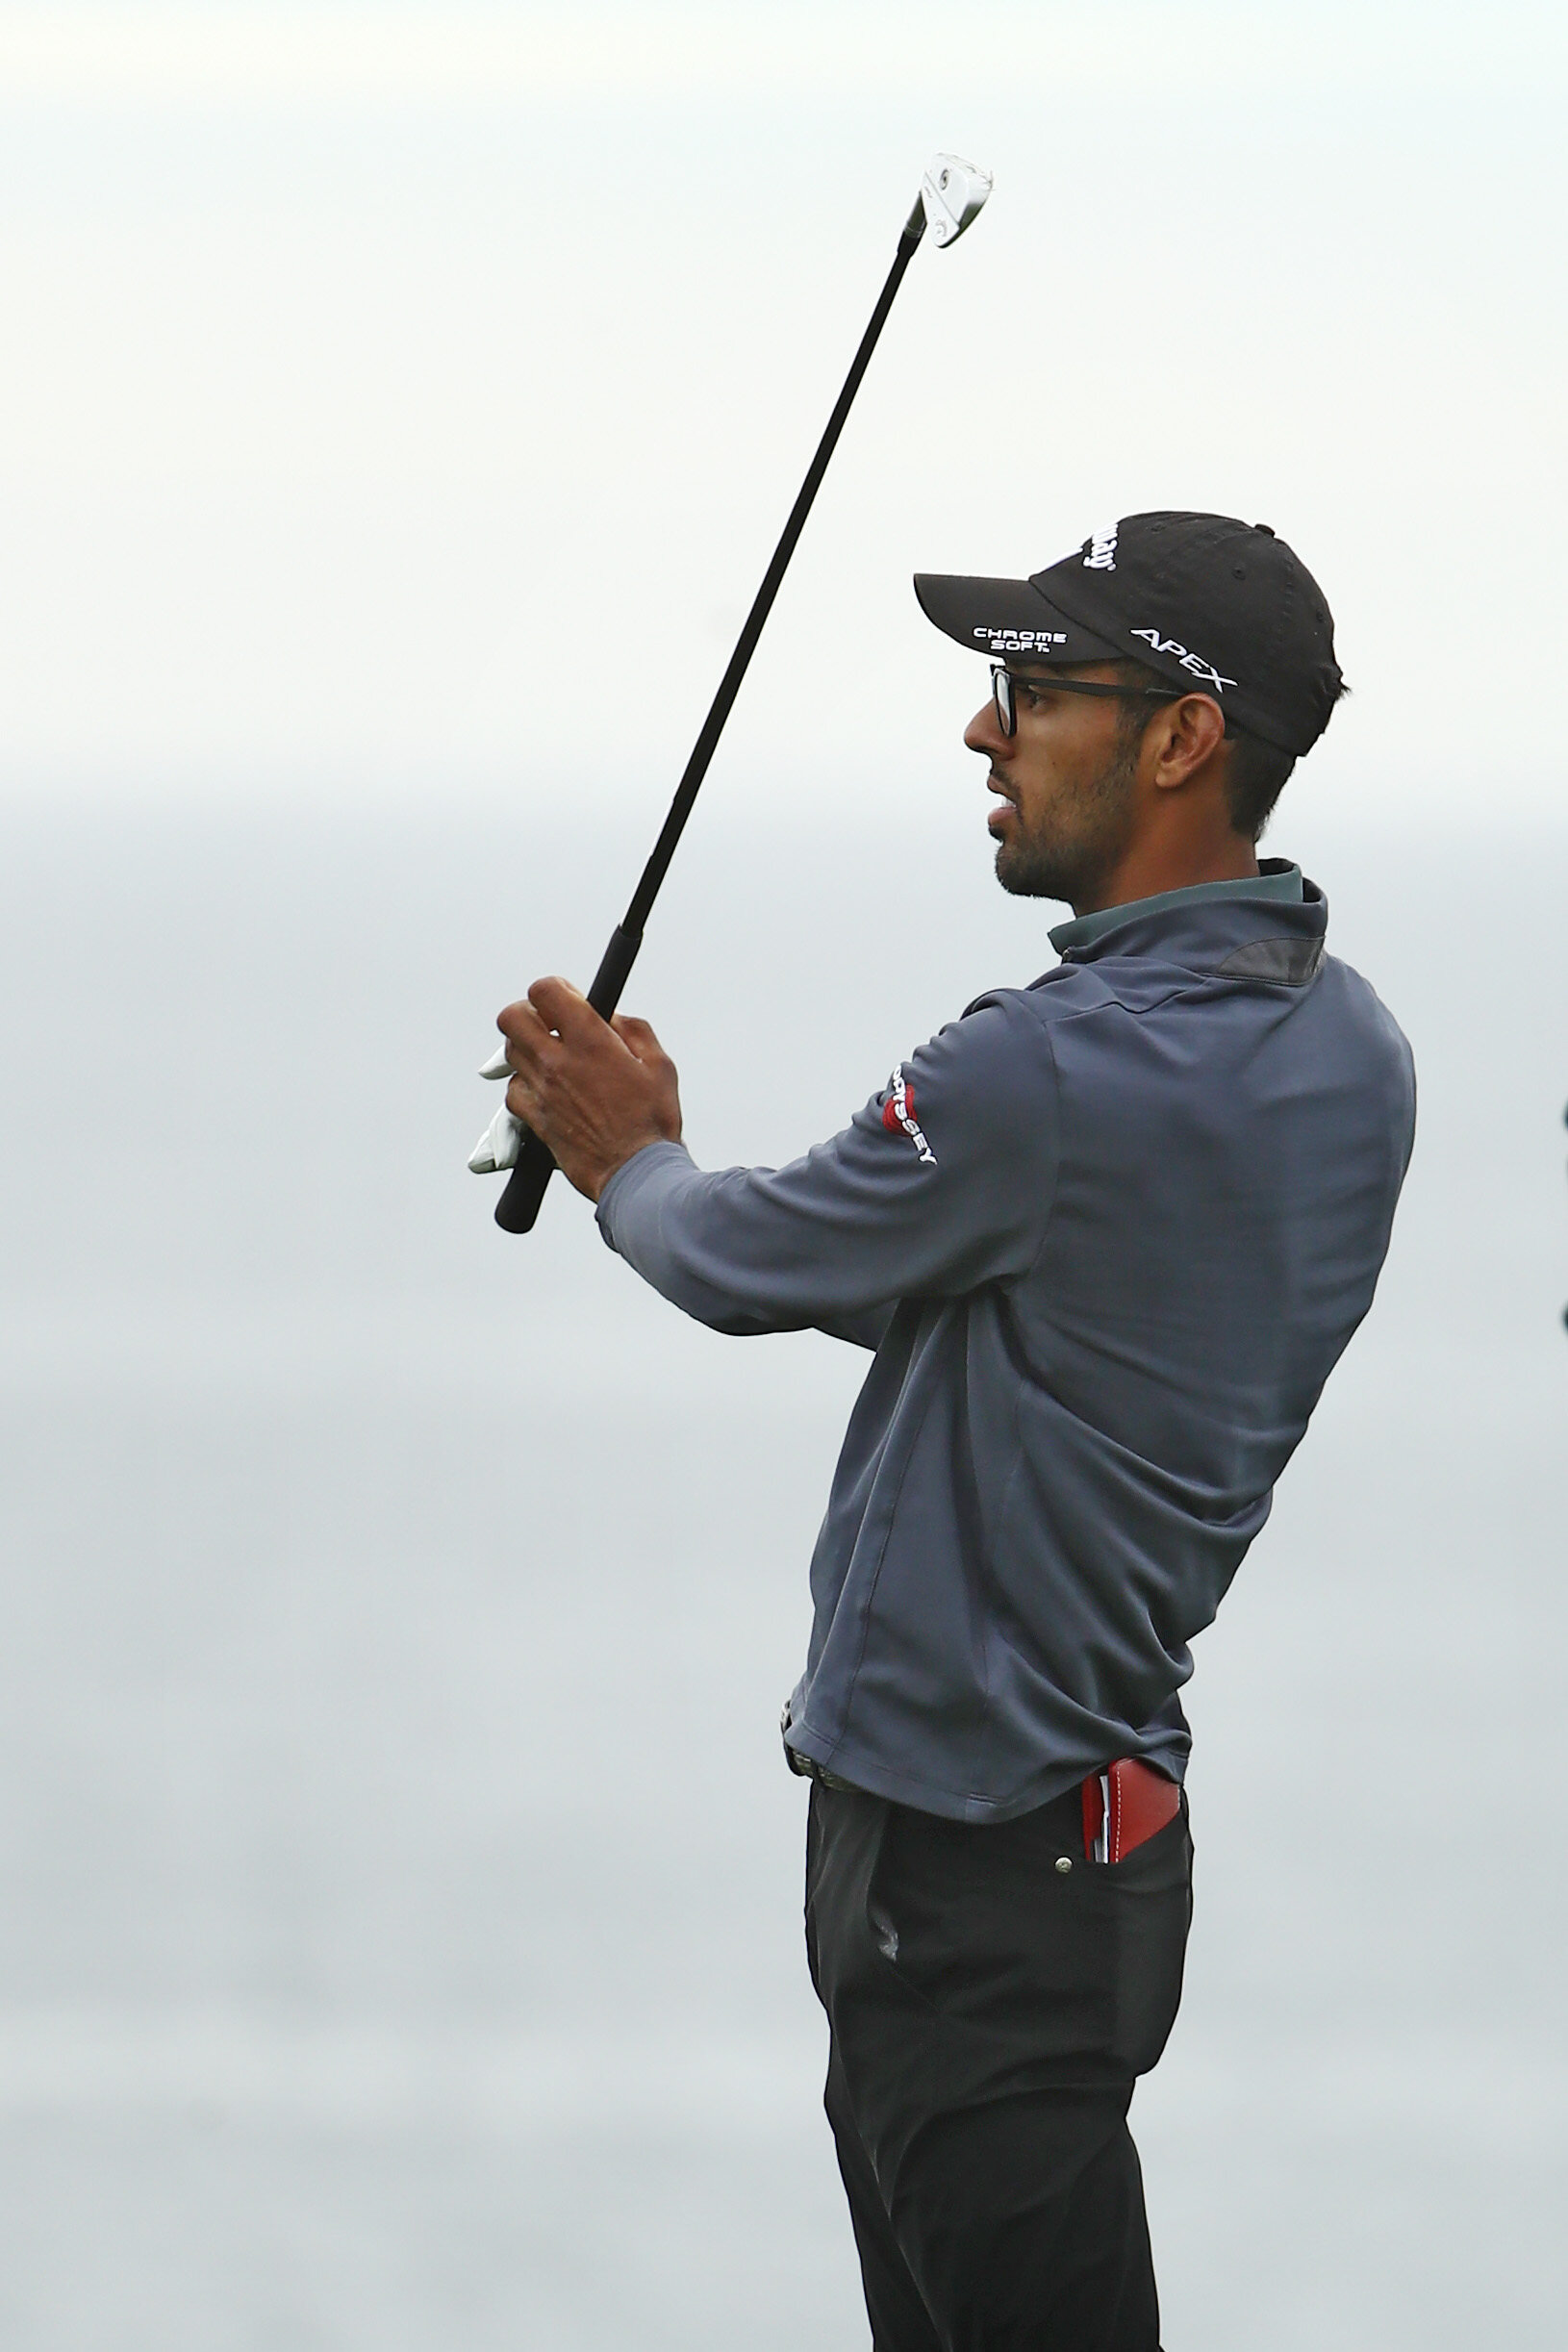  PEBBLE BEACH, CALIFORNIA - FEBRUARY 11: Akshay Bhatia of the United States plays his second shot on the ninth hole during the first round of the AT&T Pebble Beach Pro-Am at Pebble Beach Golf Links on February 11, 2021 in Pebble Beach, California. (P